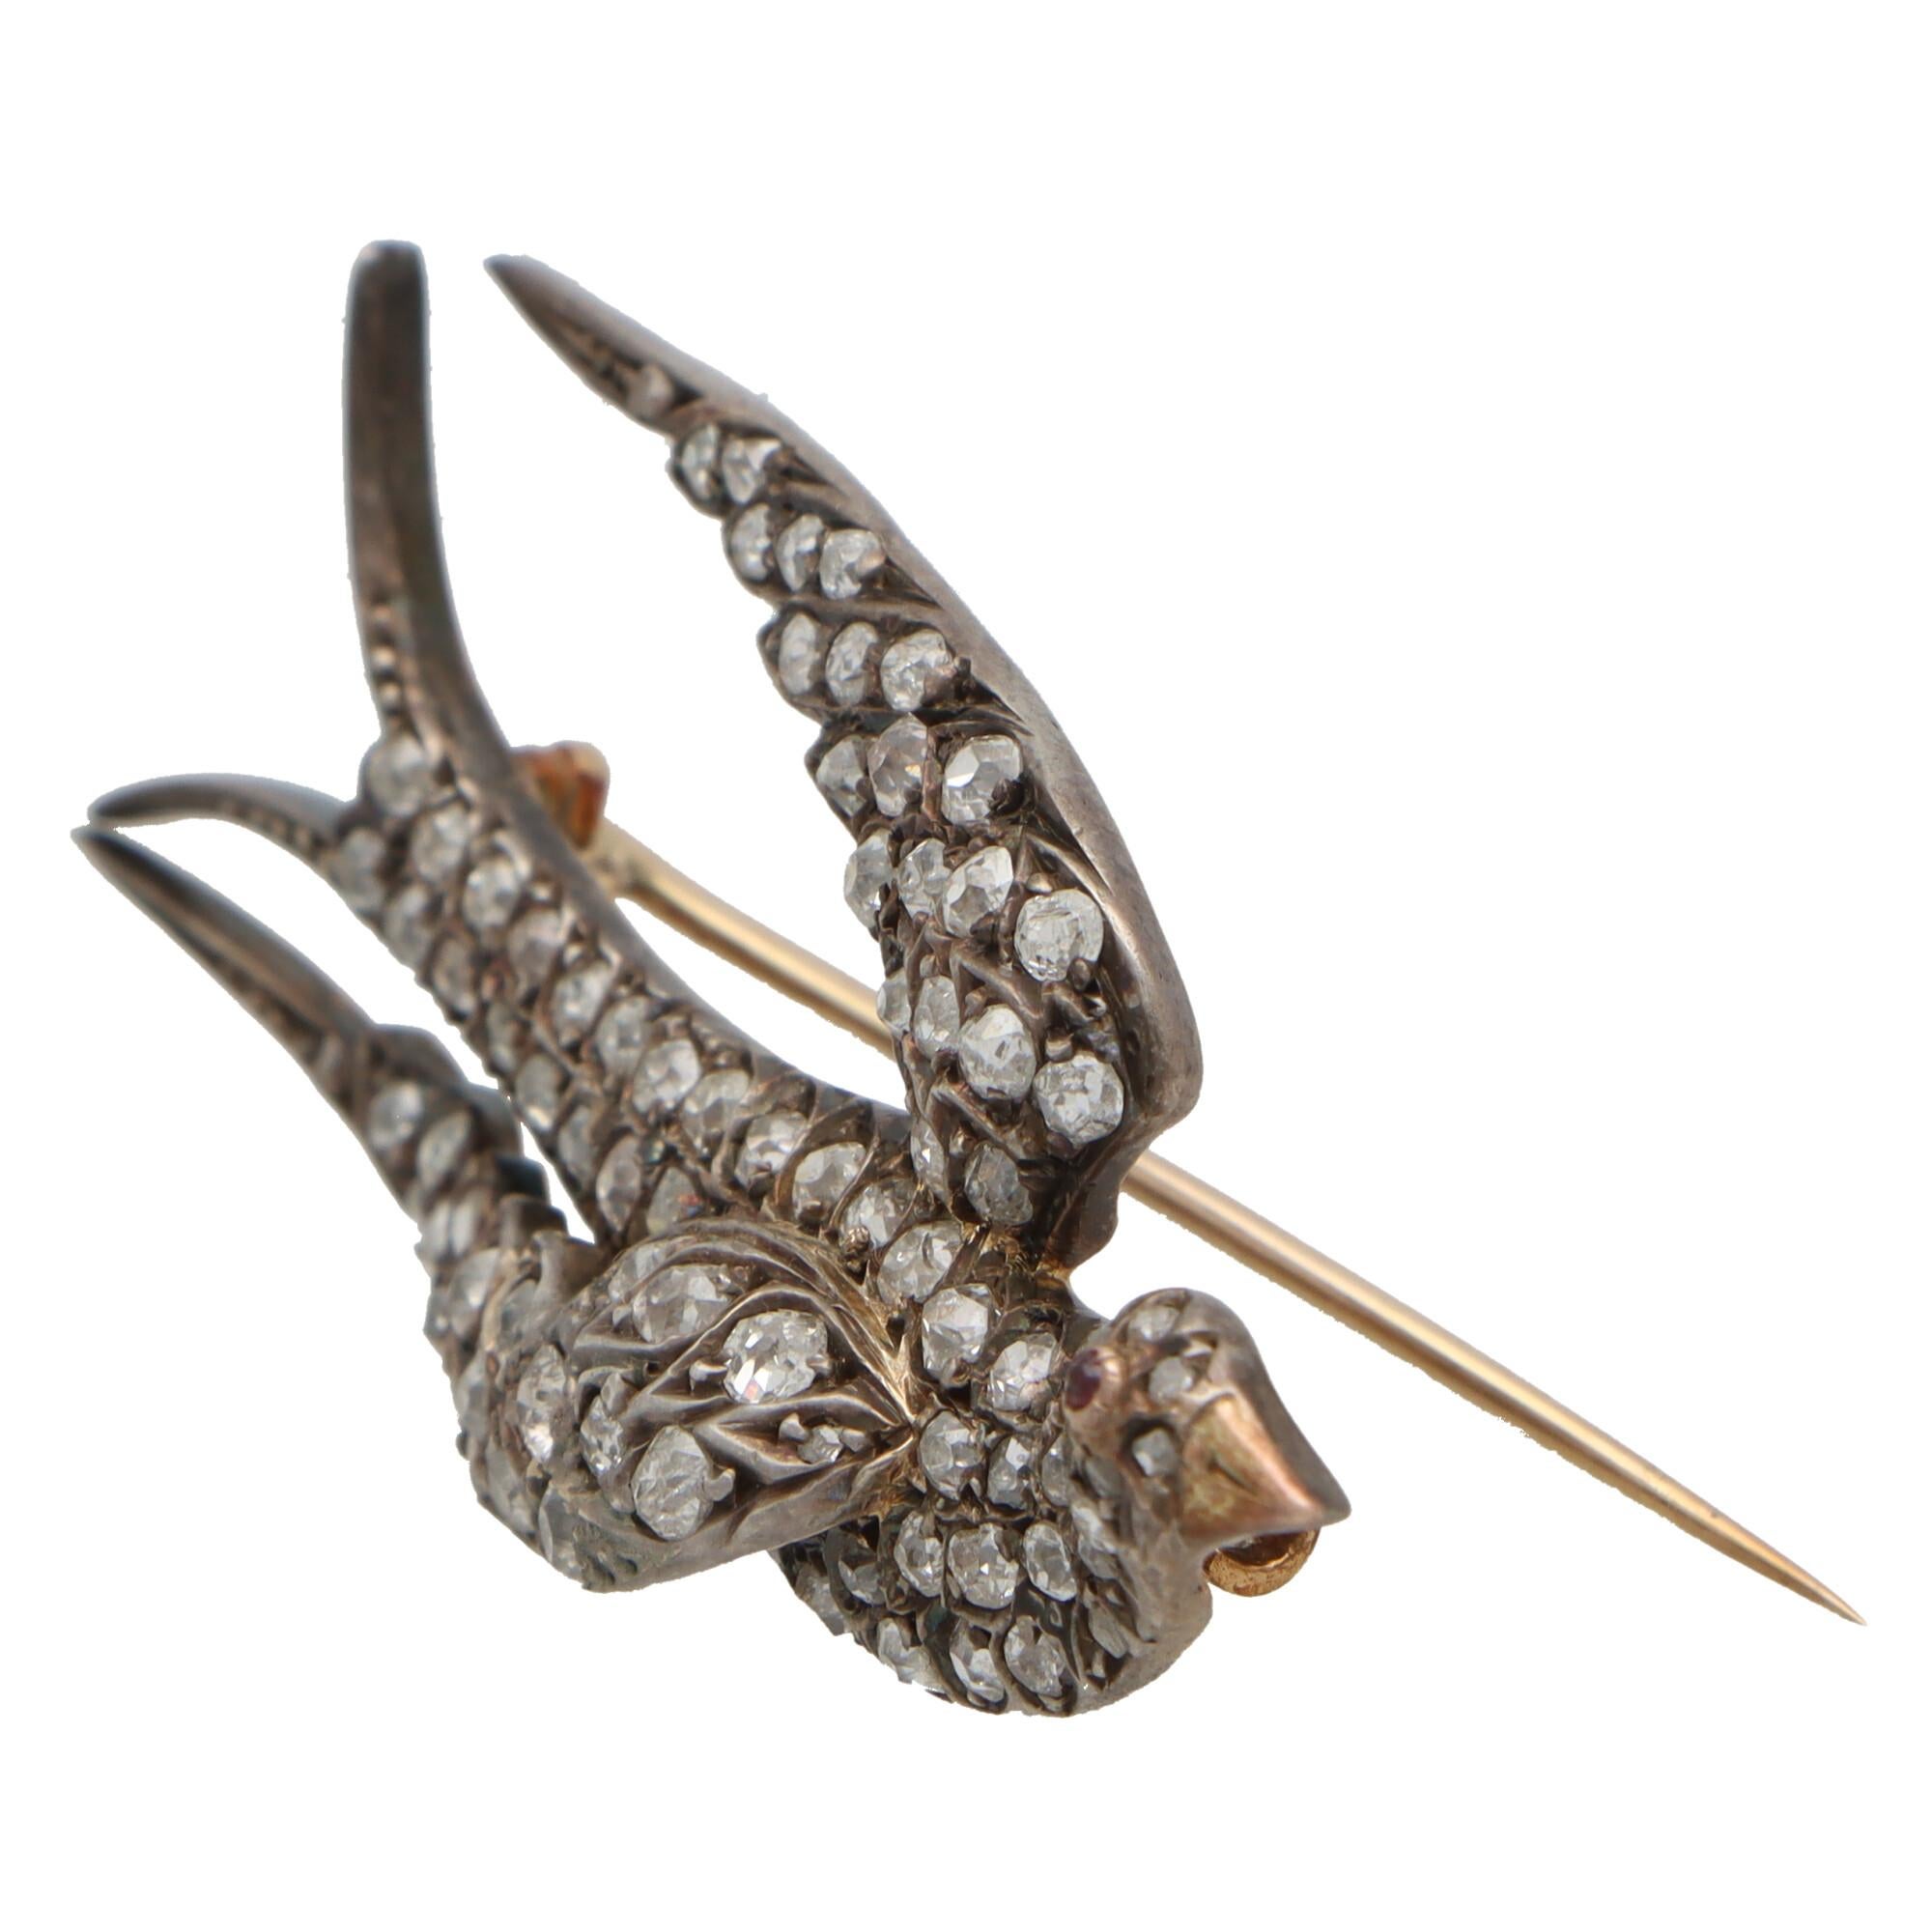  A beautiful Late Victorian diamond bird brooch set in silver on gold. 

The brooch depicts a sweet flying bird set throughout with a mixture of rose cut and old cut diamonds. The piece has been cleverly crafted and designed so that each diamond is